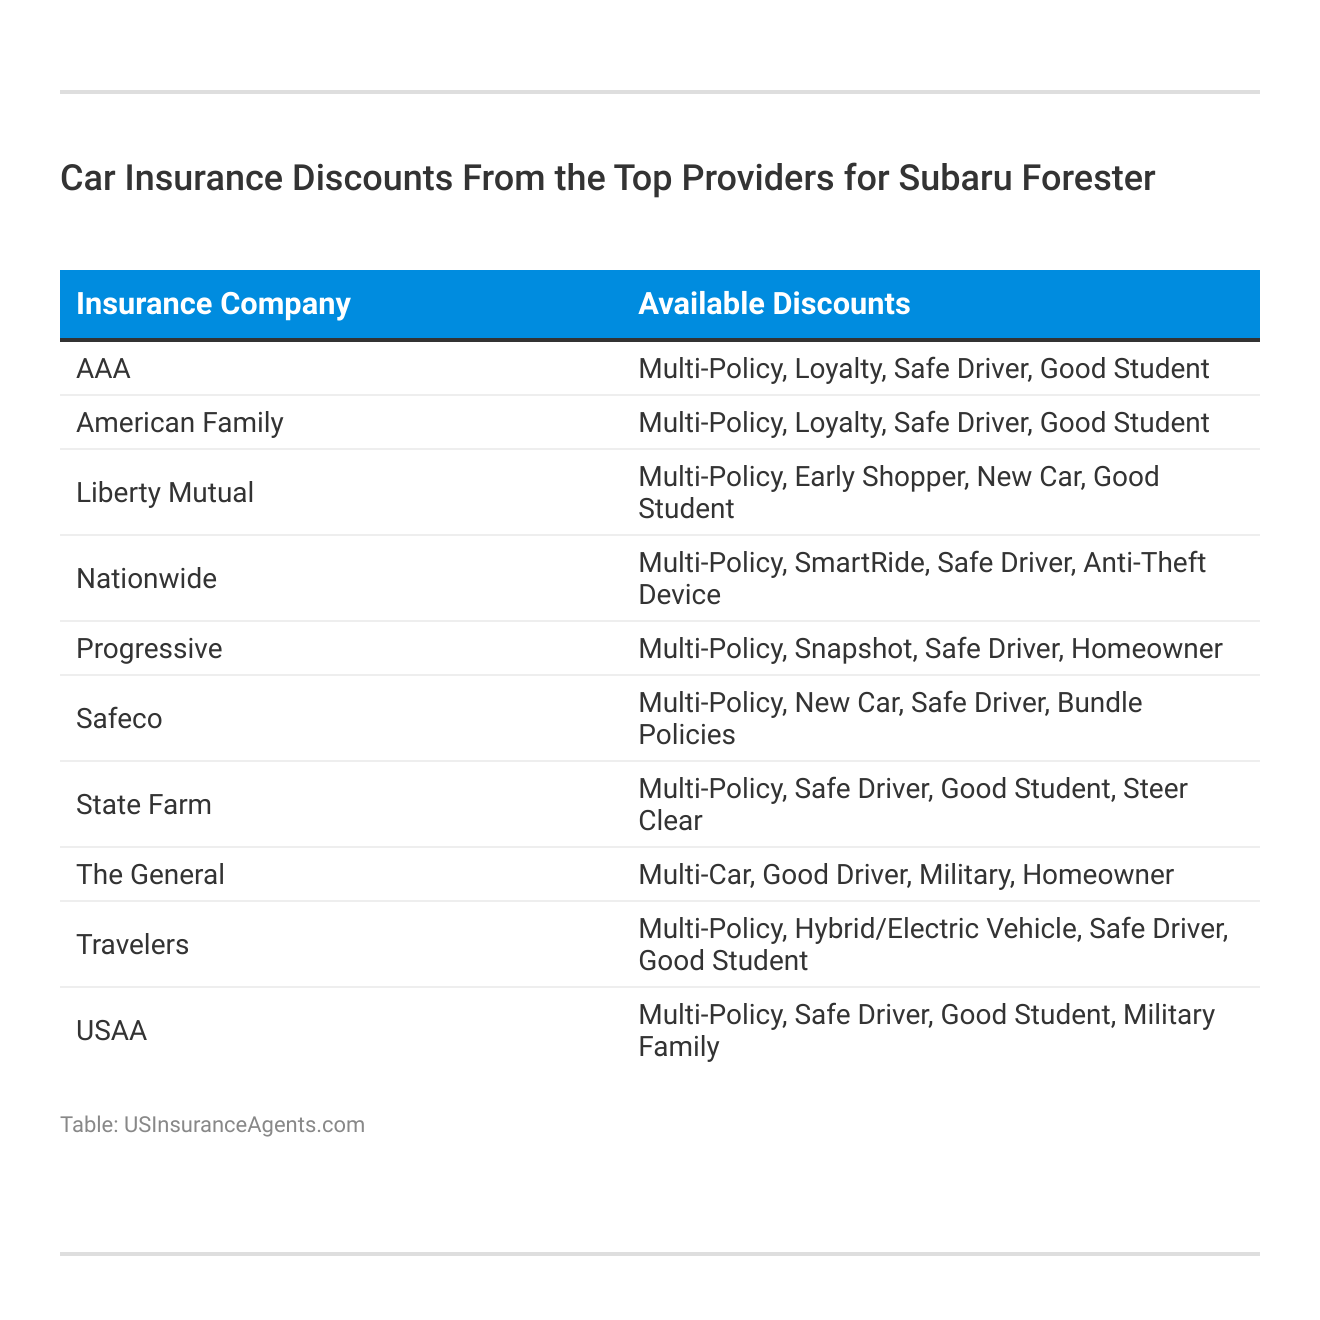 <h3>Car Insurance Discounts From the Top Providers for Subaru Forester</h3>